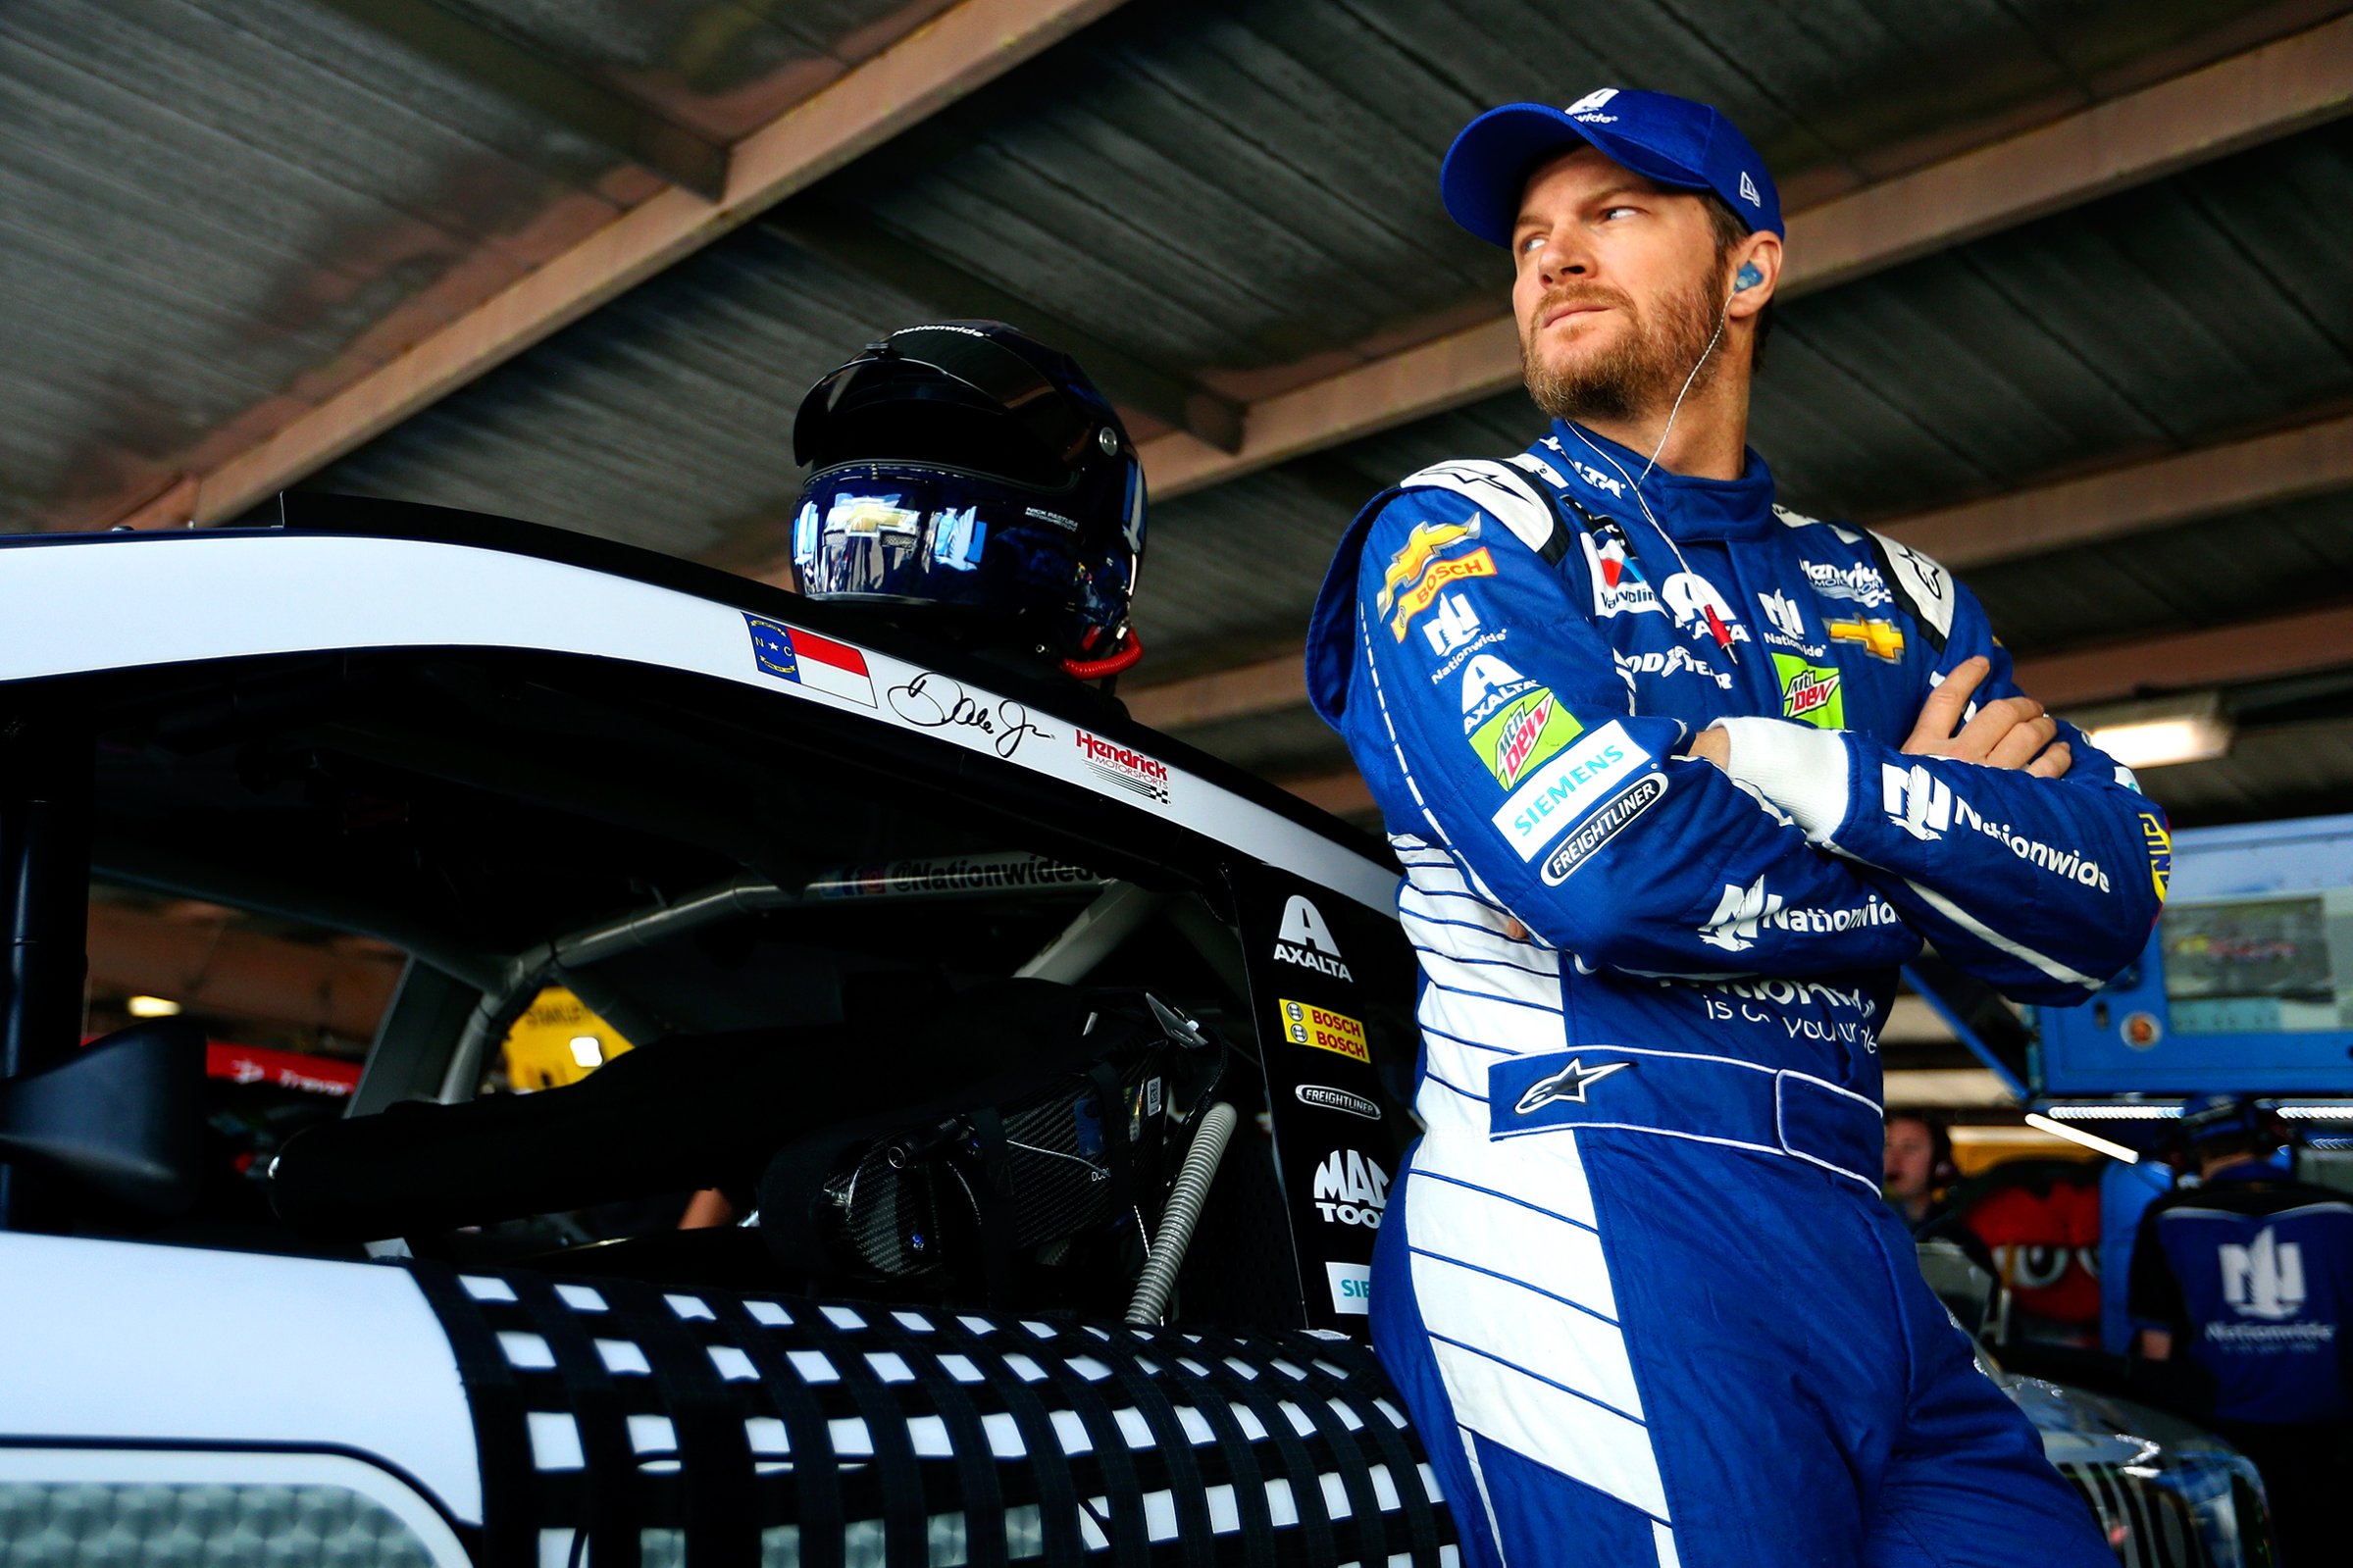 Fans have voted Earnhardt the most popular driver in NASCAR for 14 straight years